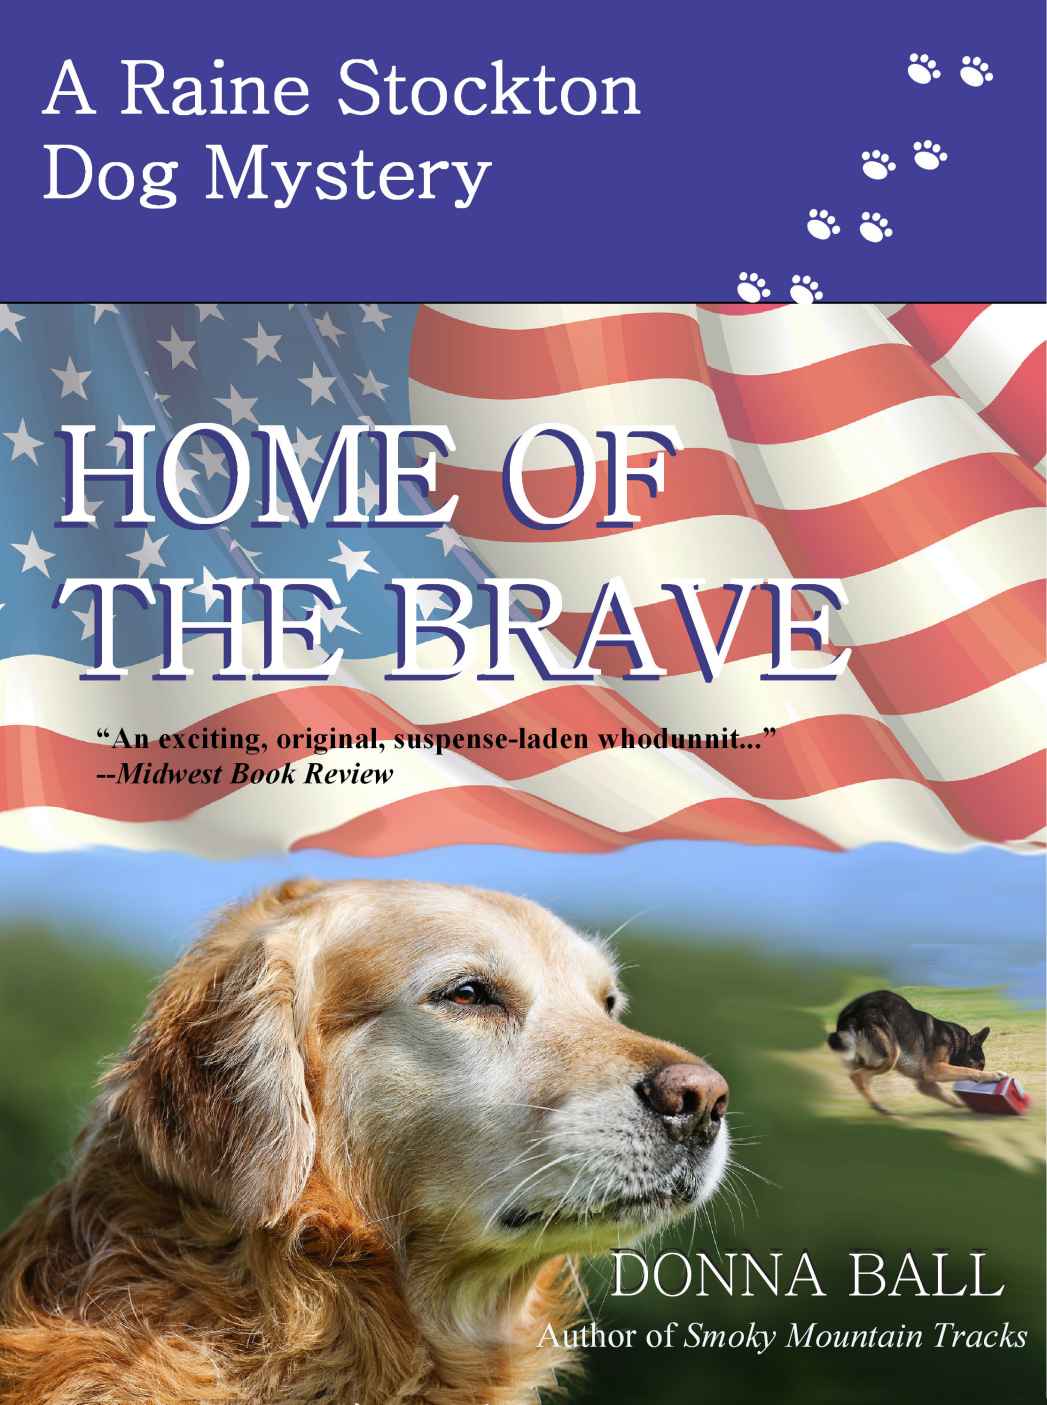 Home of the Brave (Raine Stockton Dog Mysteries Book 9) by Donna Ball